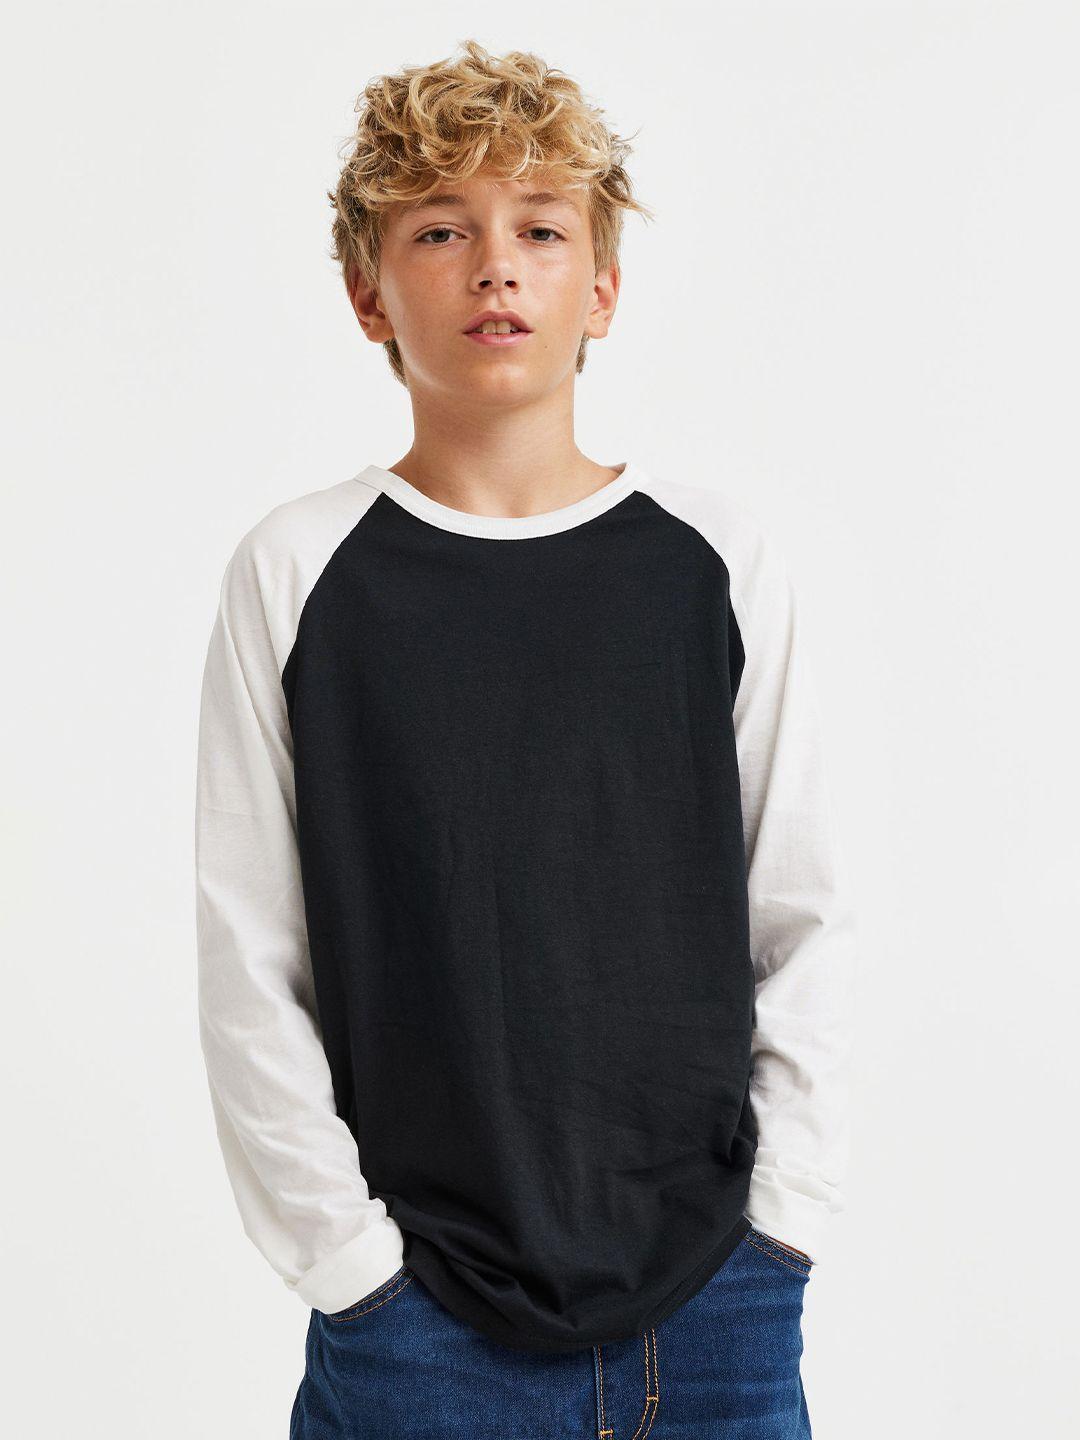 h&m boys pack of 3 colourblocked pure cotton long-sleeved tops